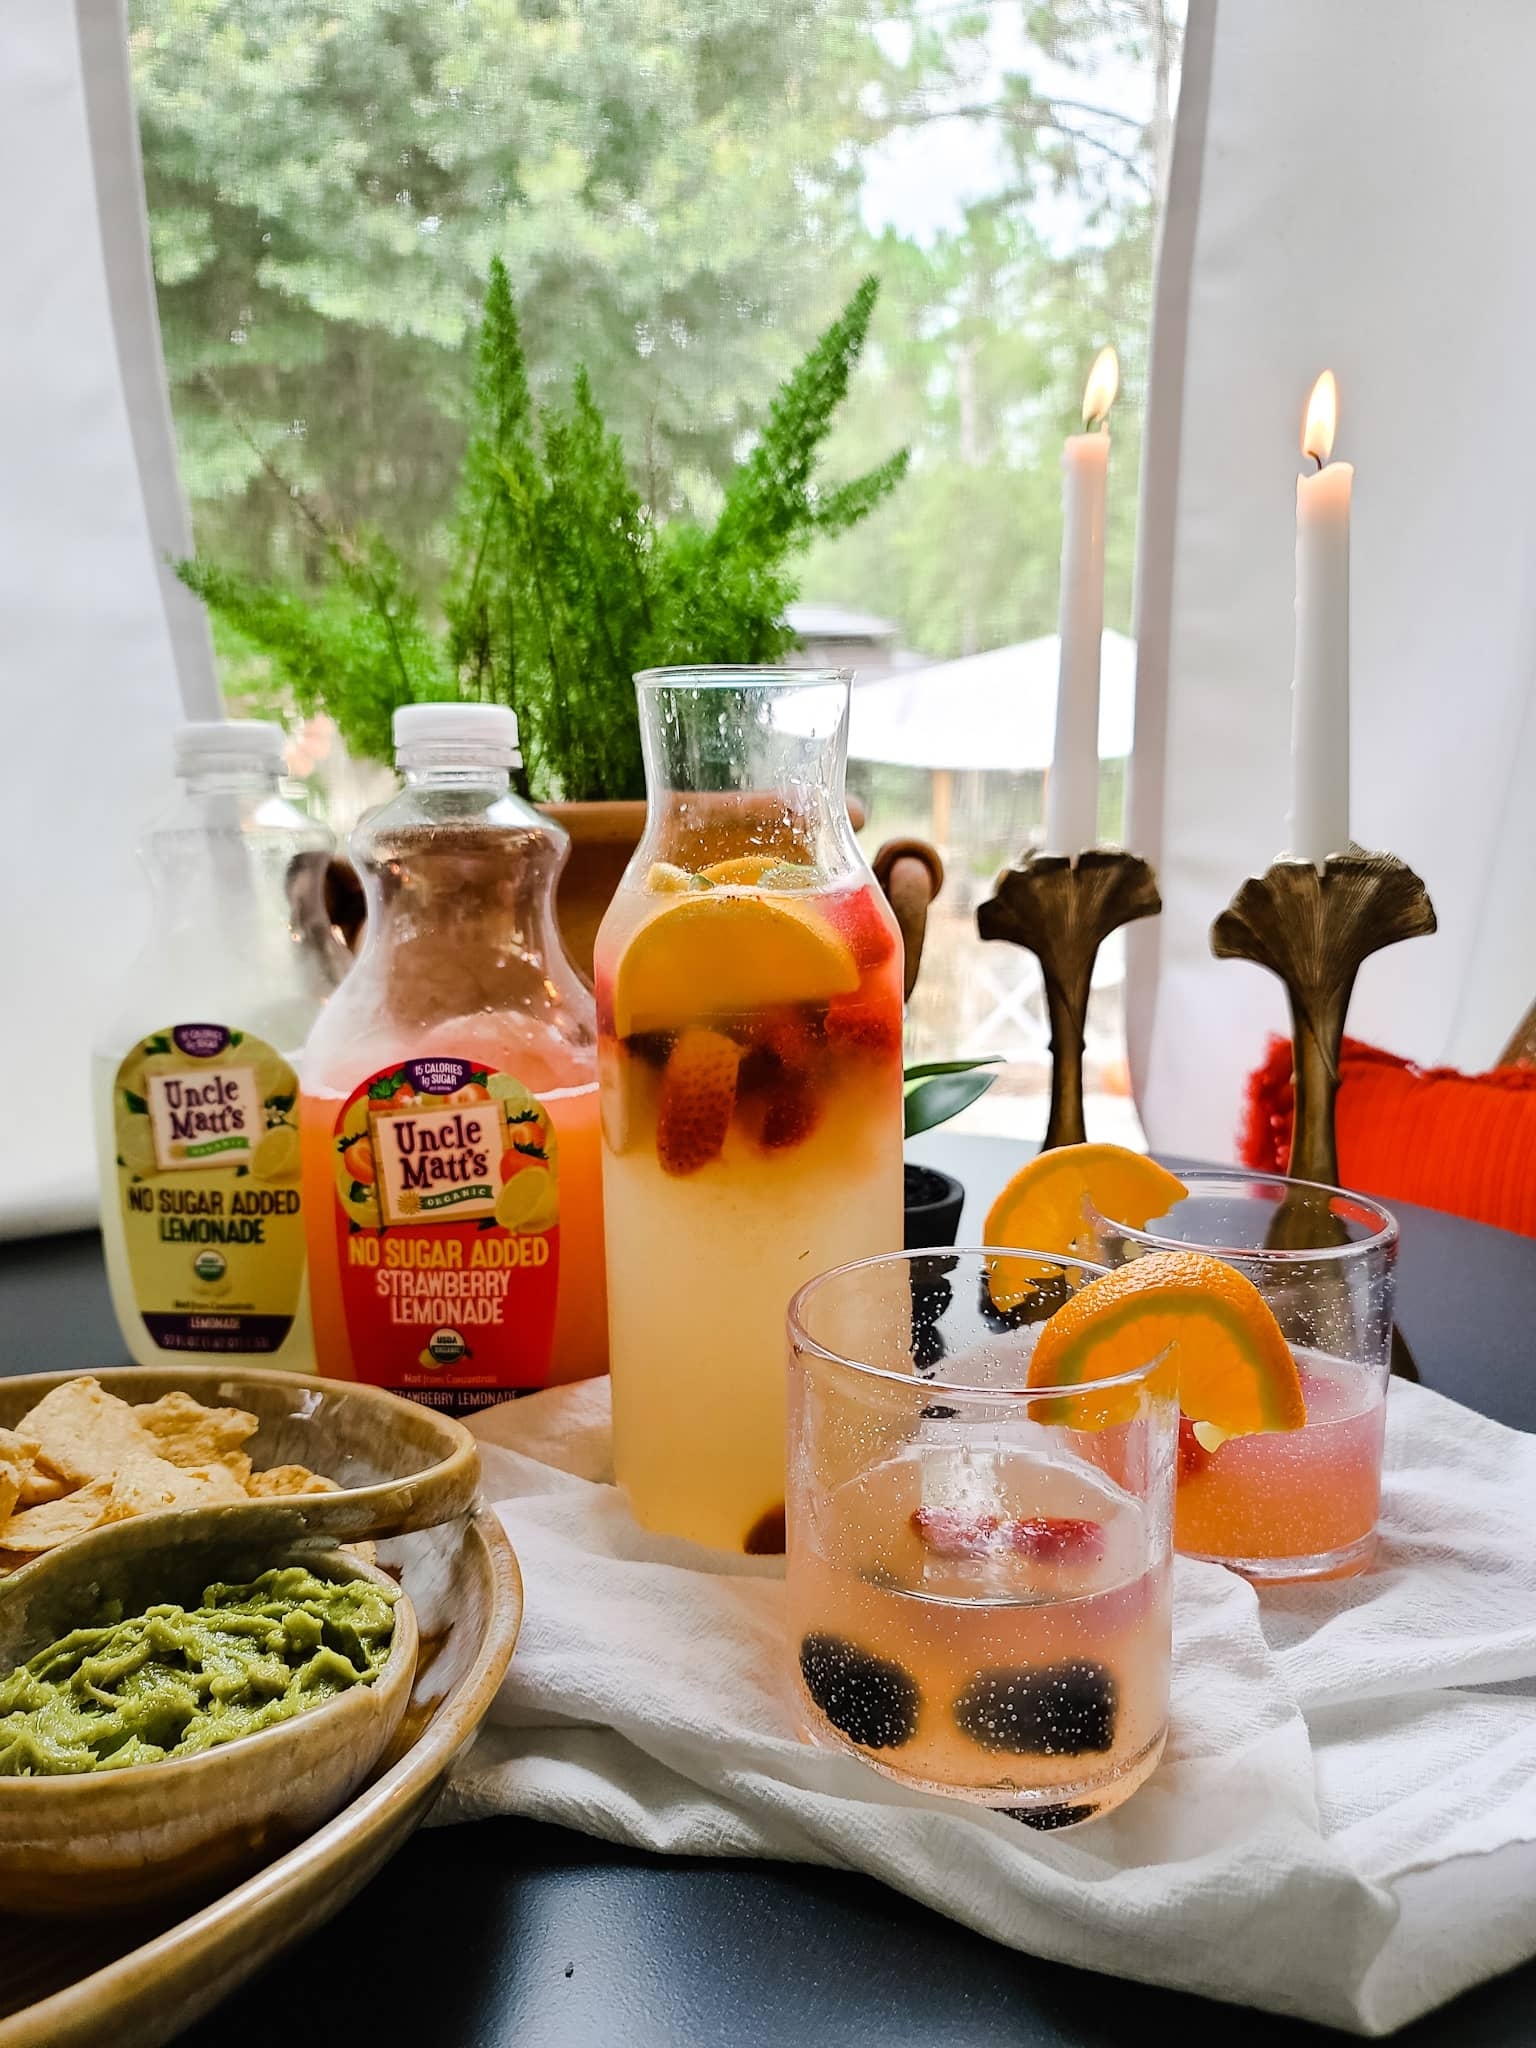 lemonade sangria recipe party ideas family fun cooking eating alcohol cocktail recipes entertaining fun recipe no sugar added healthy holiday 